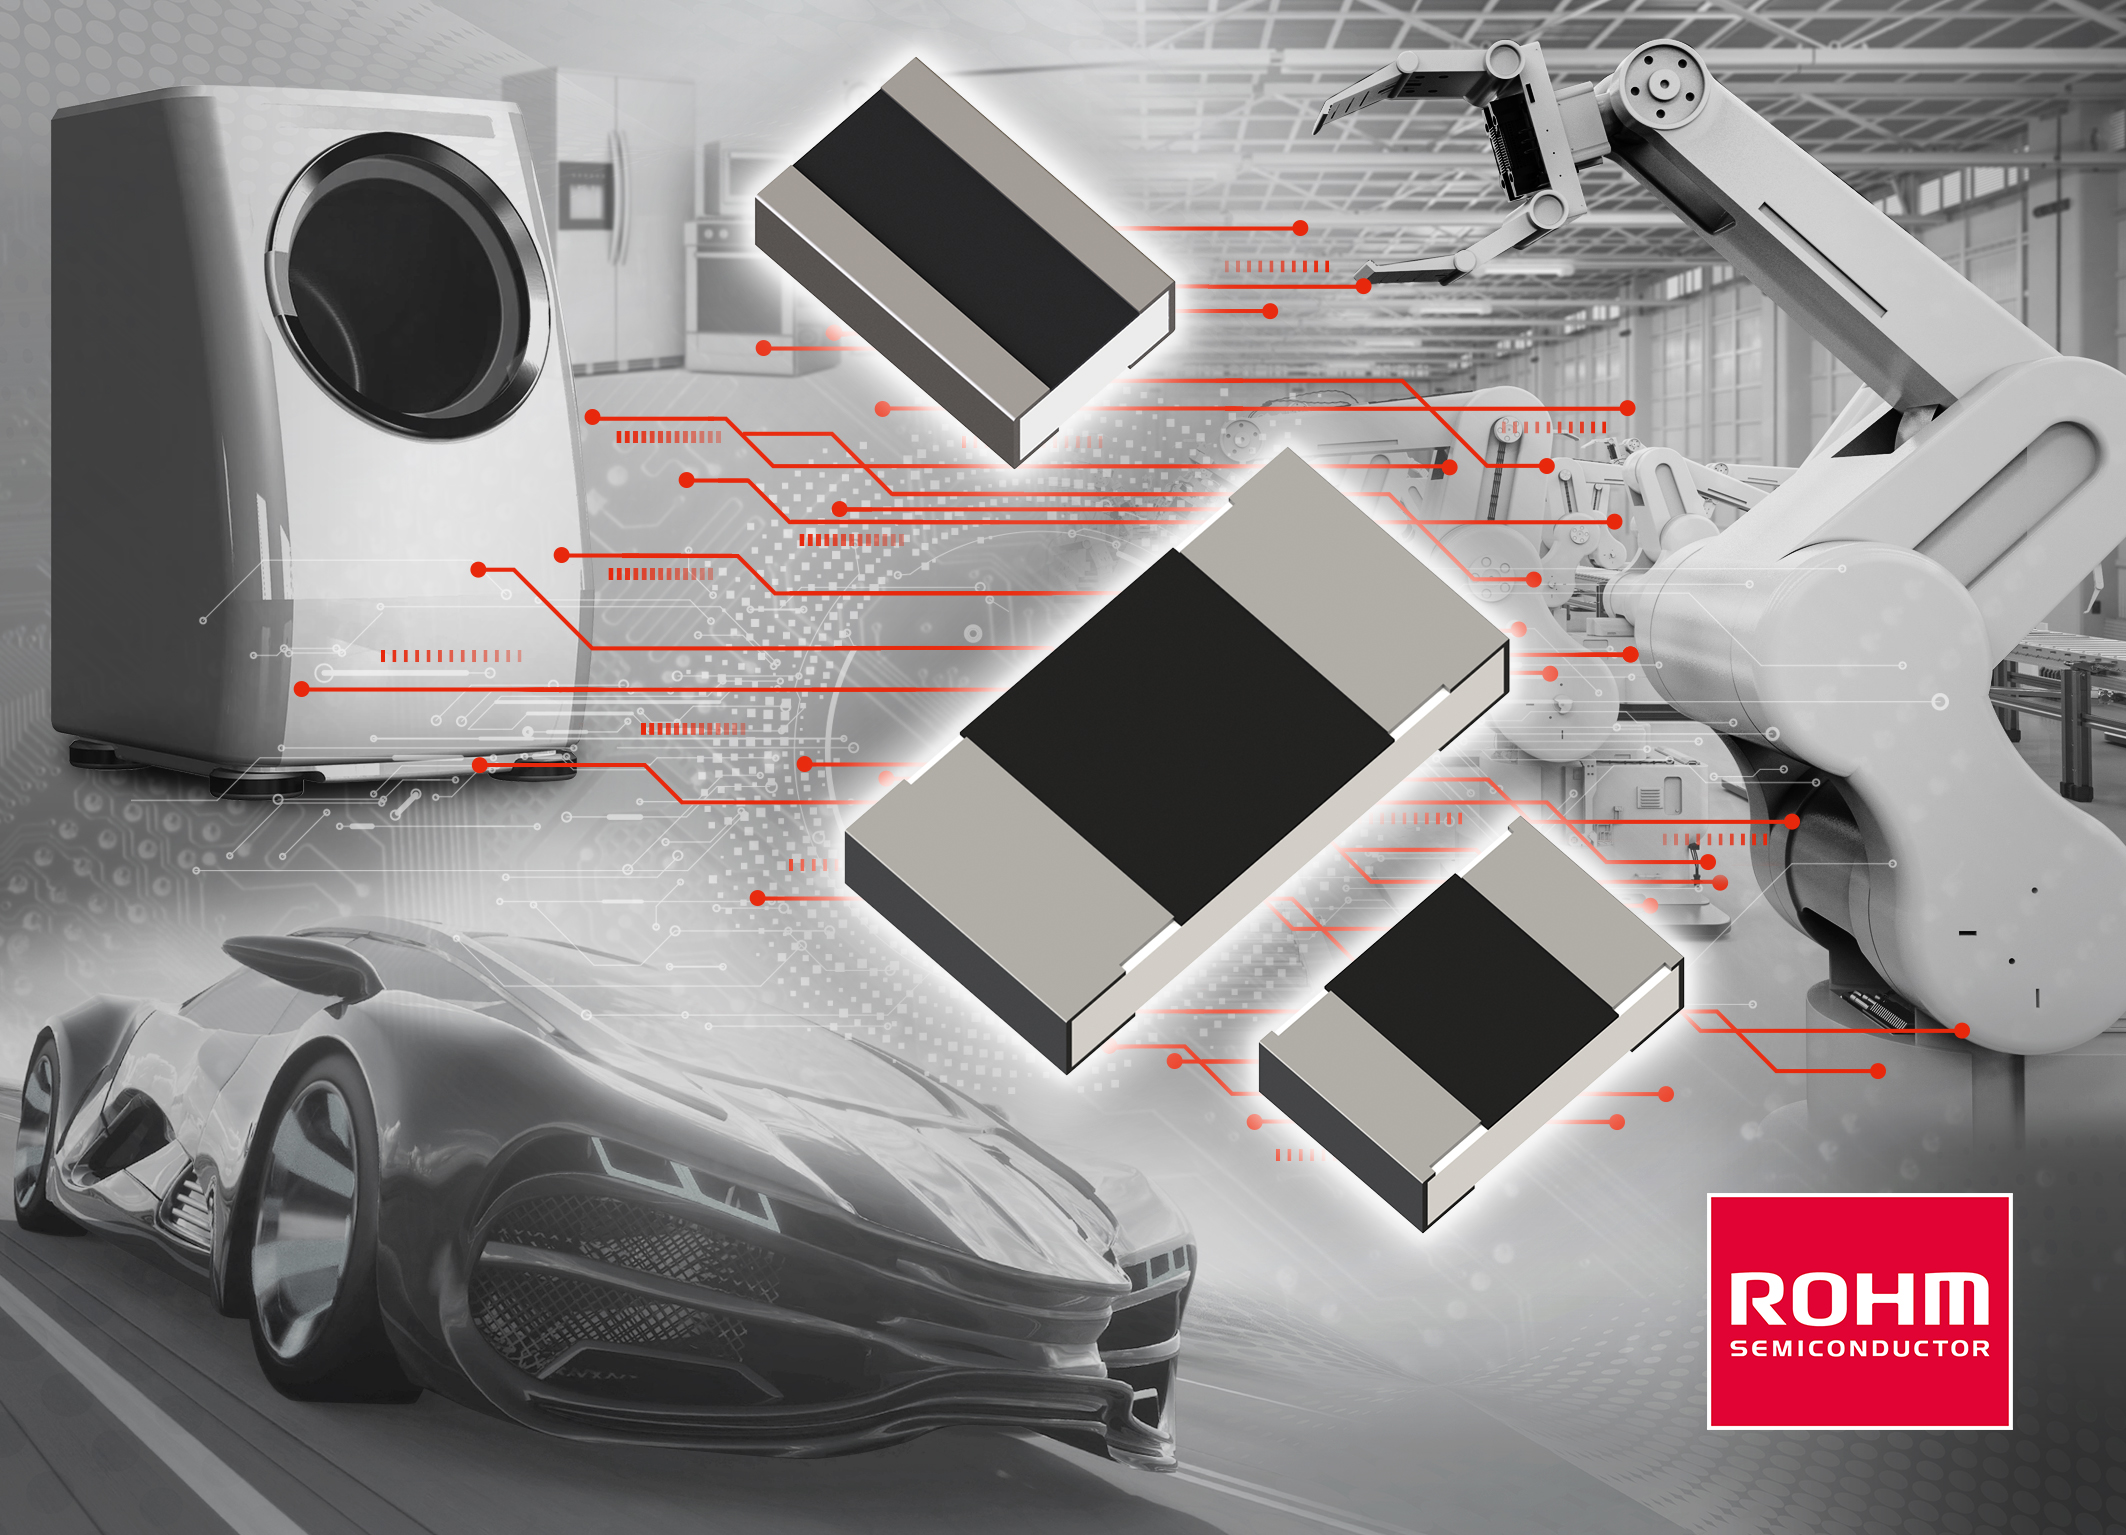 ROHM Delivers the Industry's Highest Rated Power Shunt Resistors in the 0508 Size